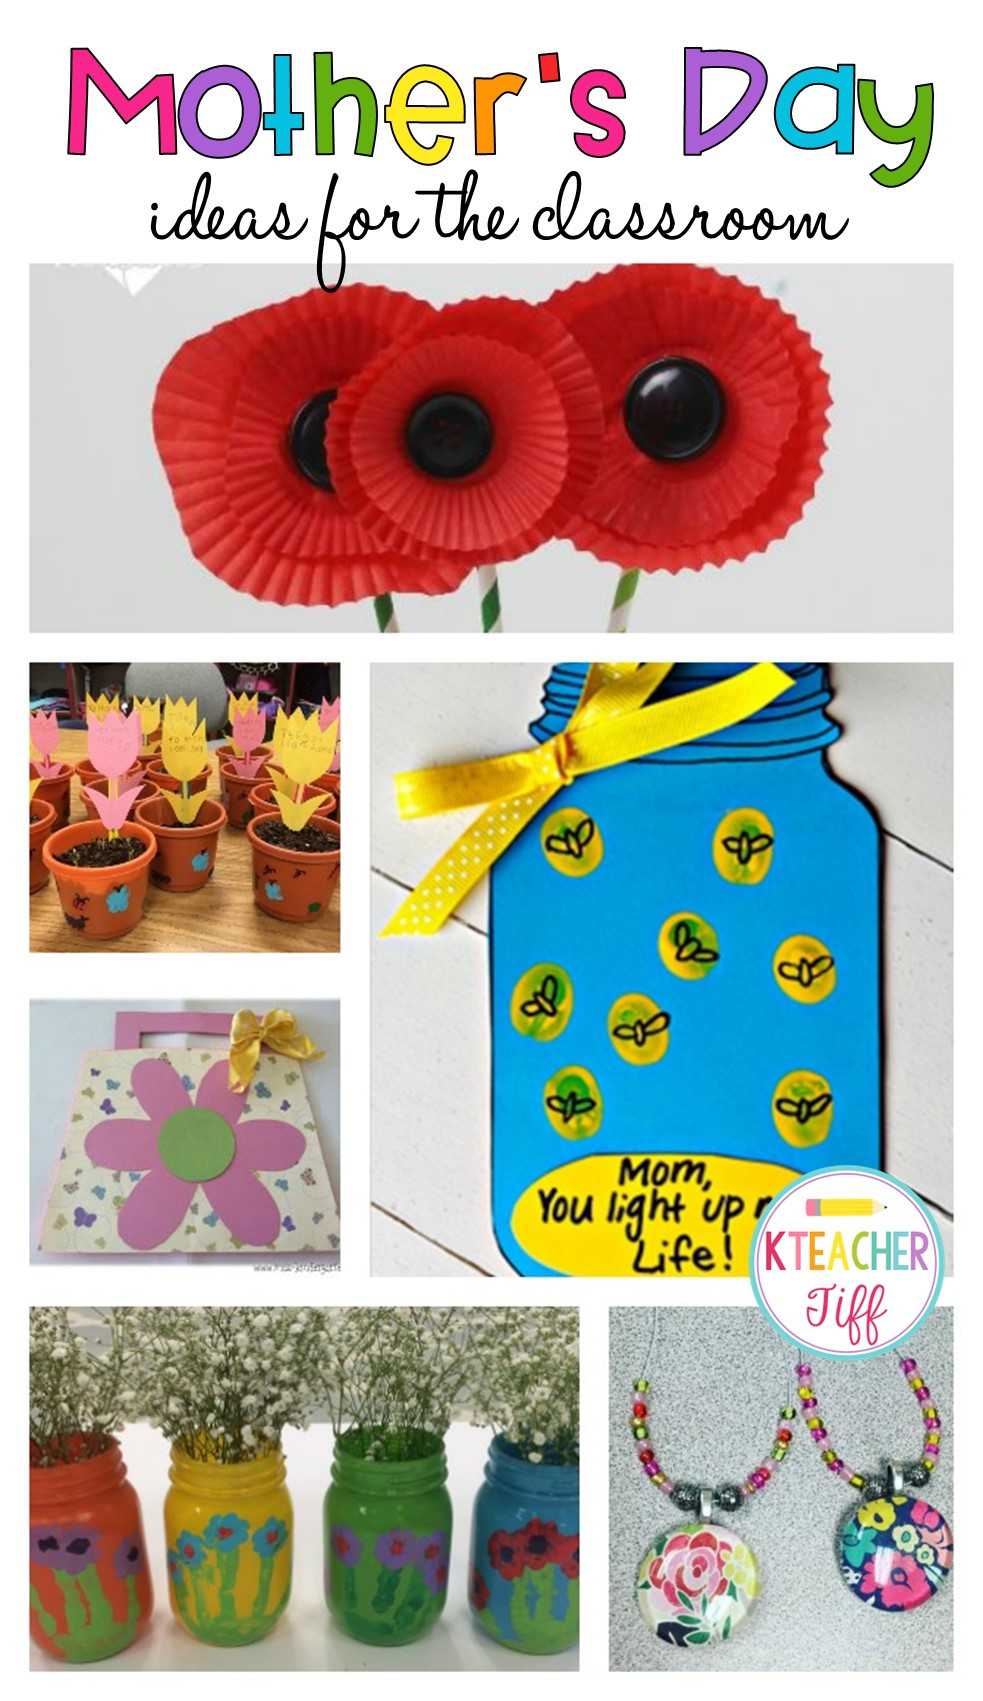 Ideas For Mother's Day Gifts
 Mother s Day Gift Ideas for the Classroom KTeacherTiff